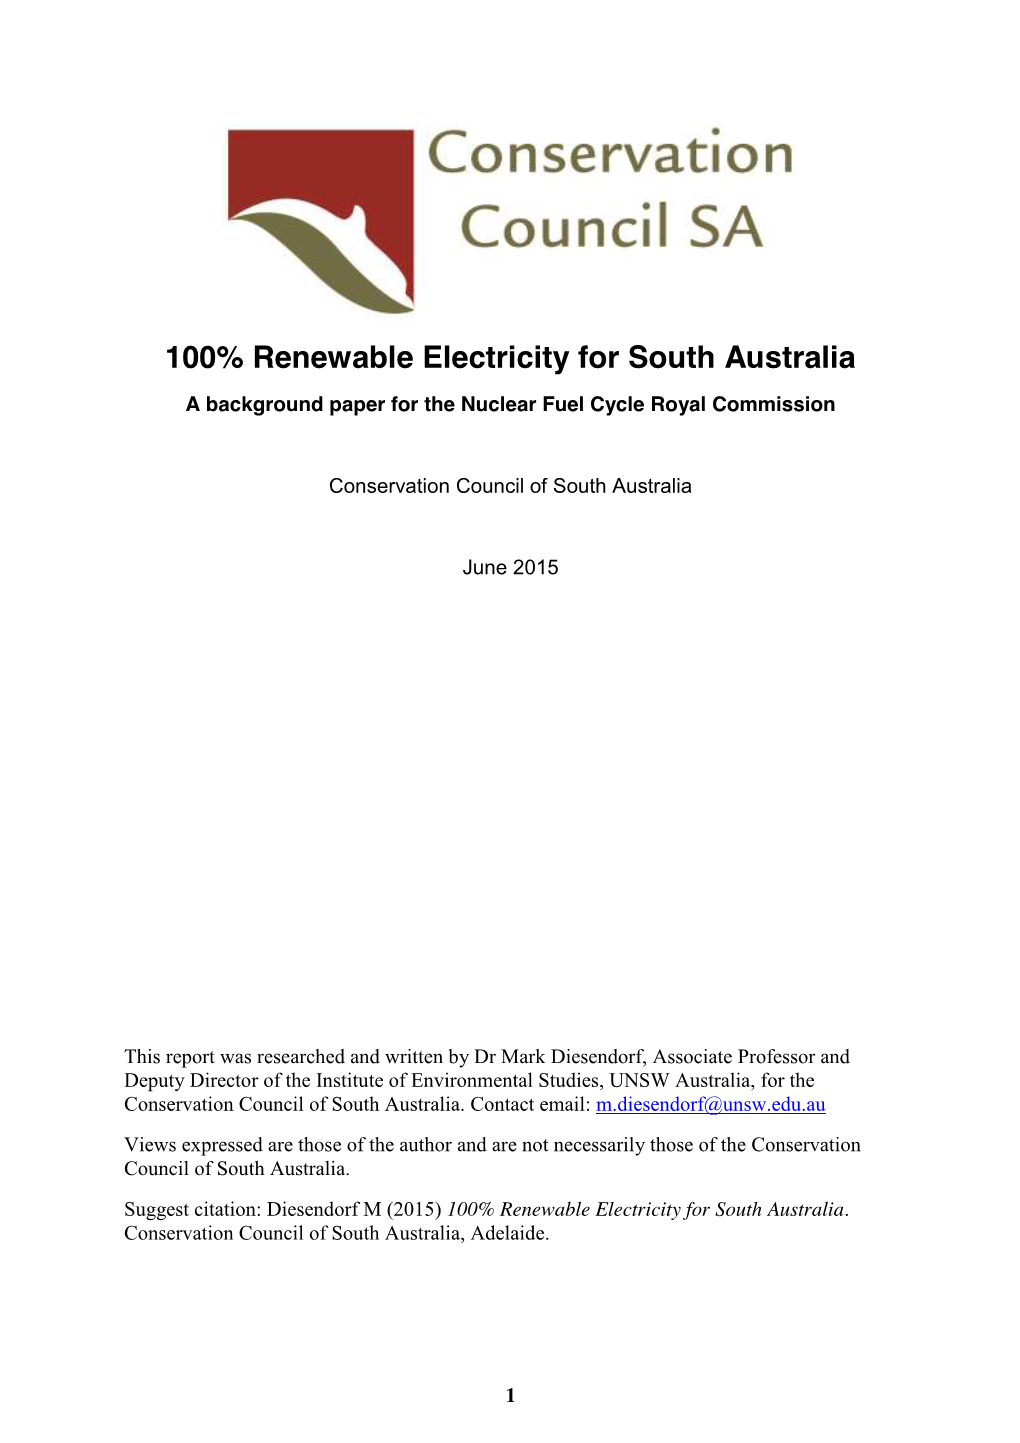 100% Renewable Electricity for South Australia a Background Paper for the Nuclear Fuel Cycle Royal Commission